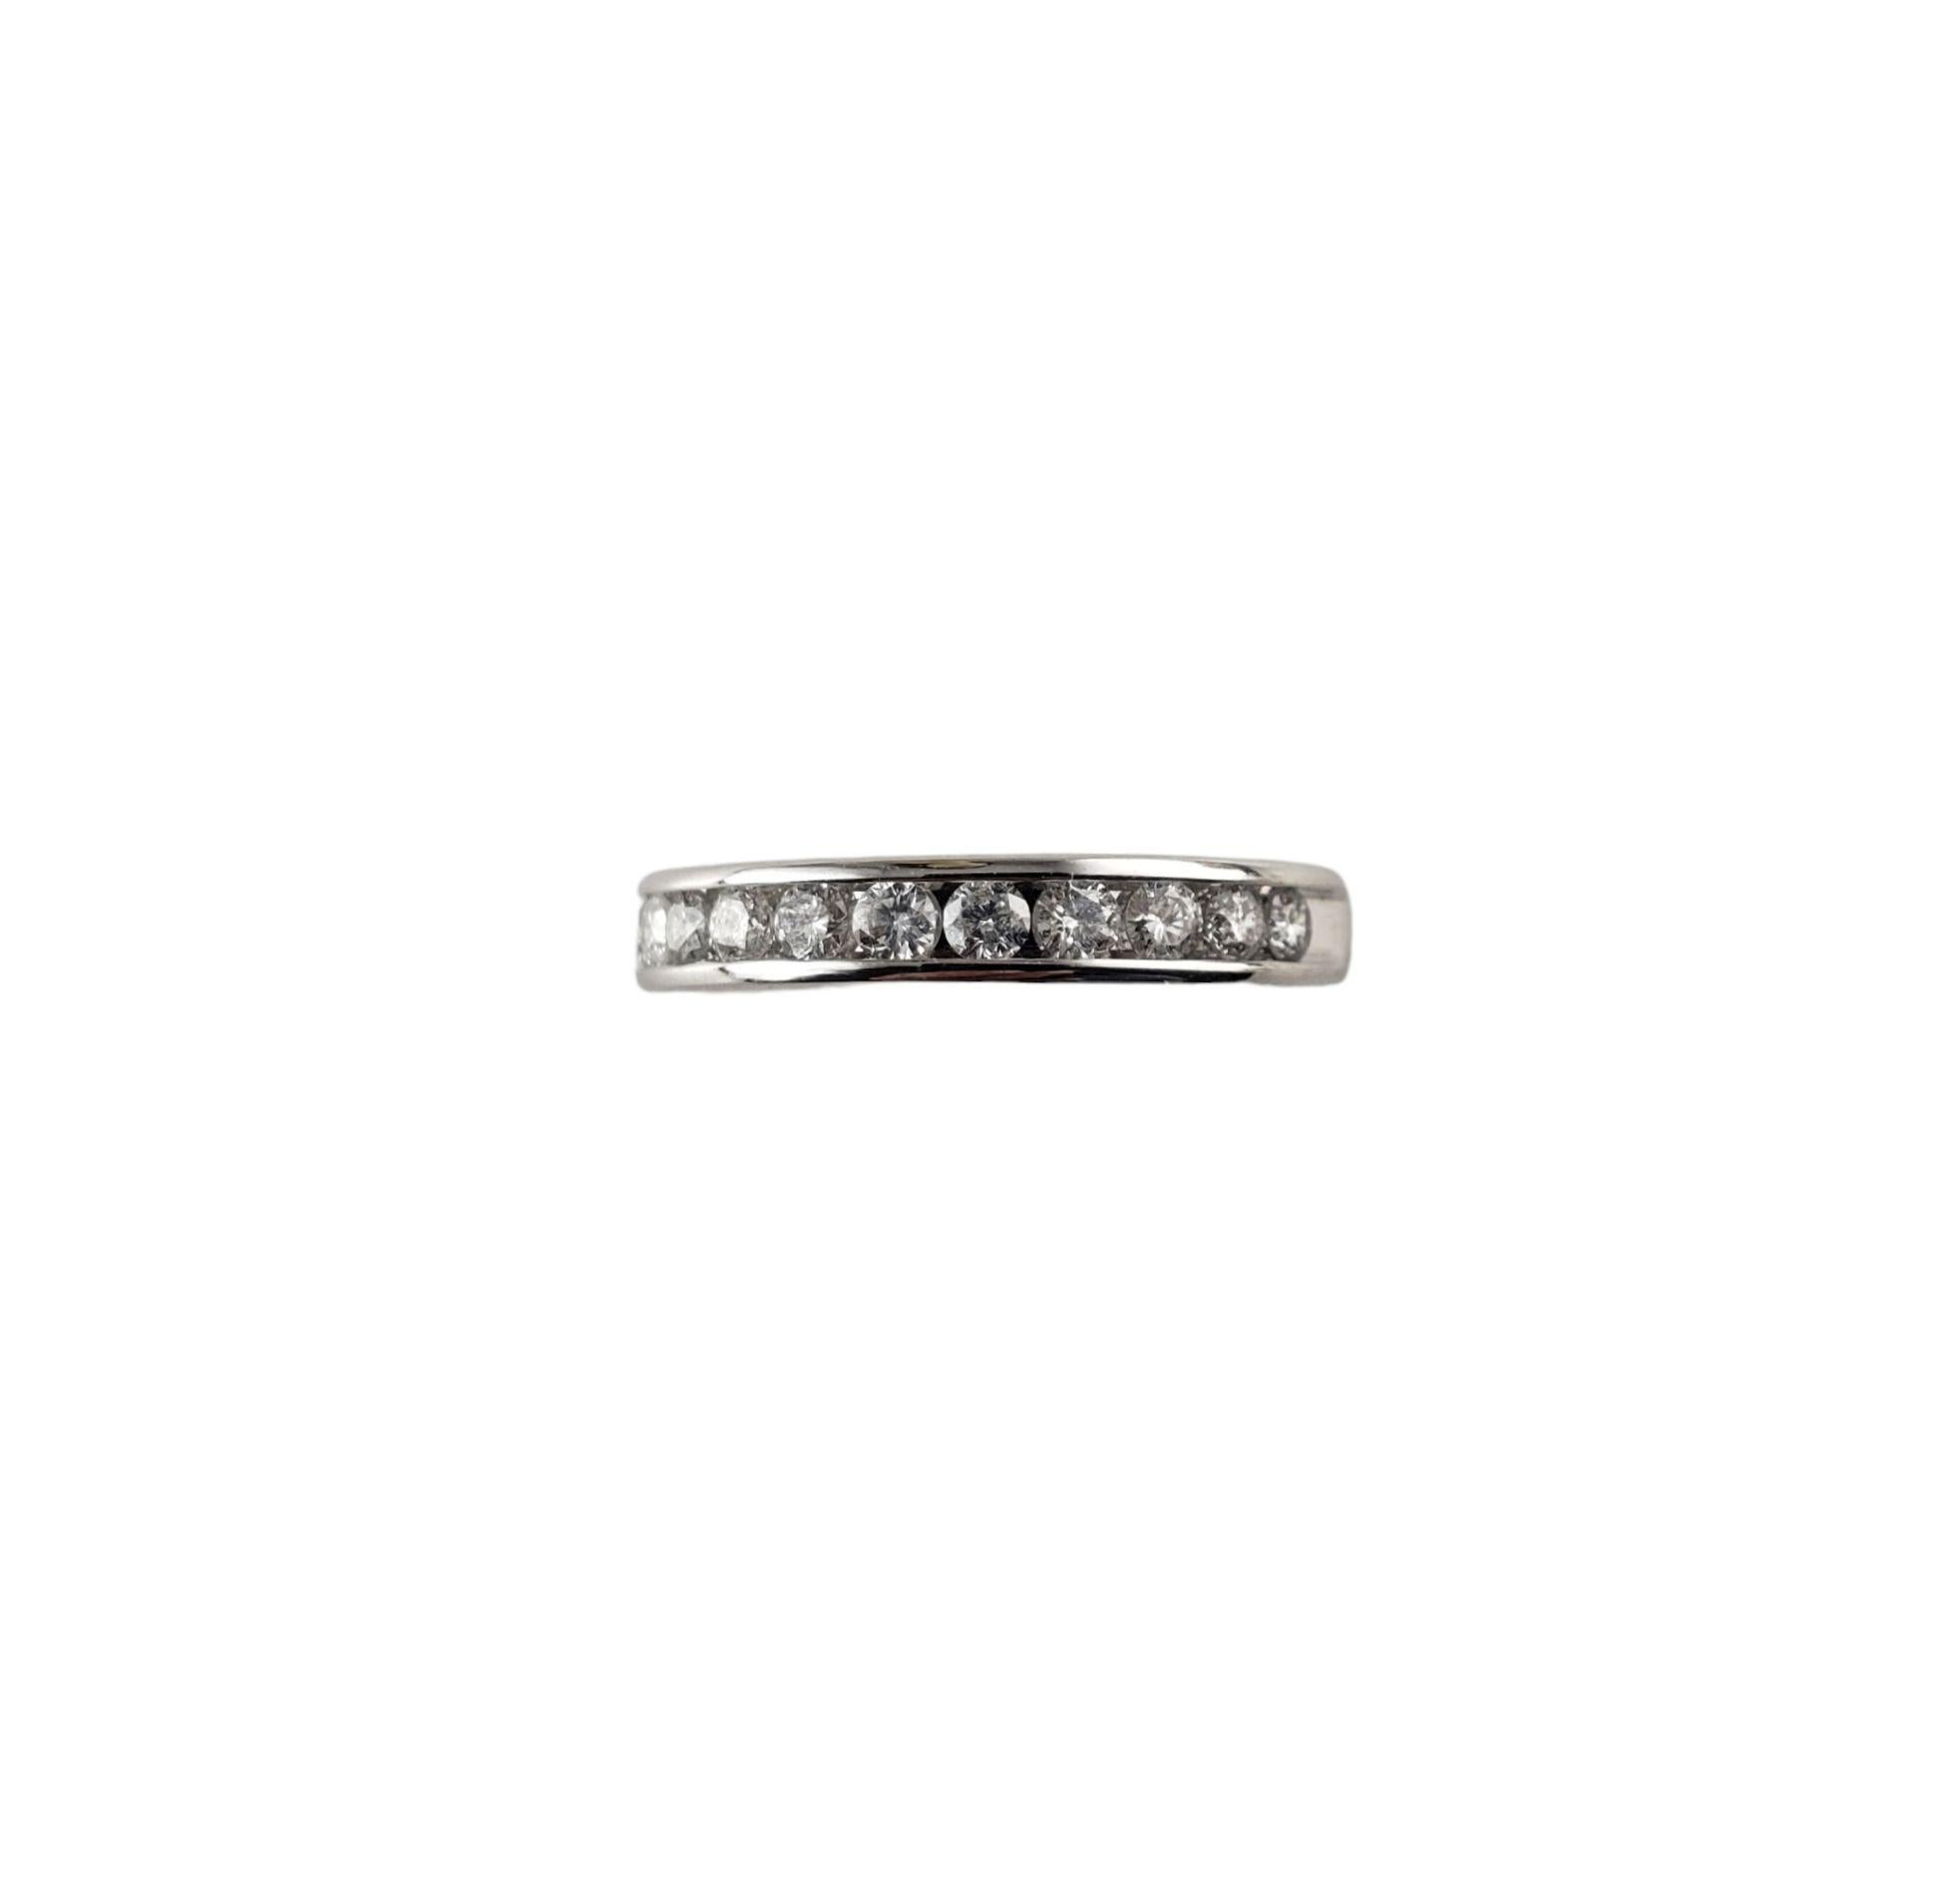 Vintage 10 Karat White Gold and Diamond Wedding Band Ring Size -

This sparkling band features 12 round brilliant cut diamonds set in classic 10K white gold. Width: 3 mm.

Approximate total diamond weight:  .60 ct.

Diamond color:  I

Diamond